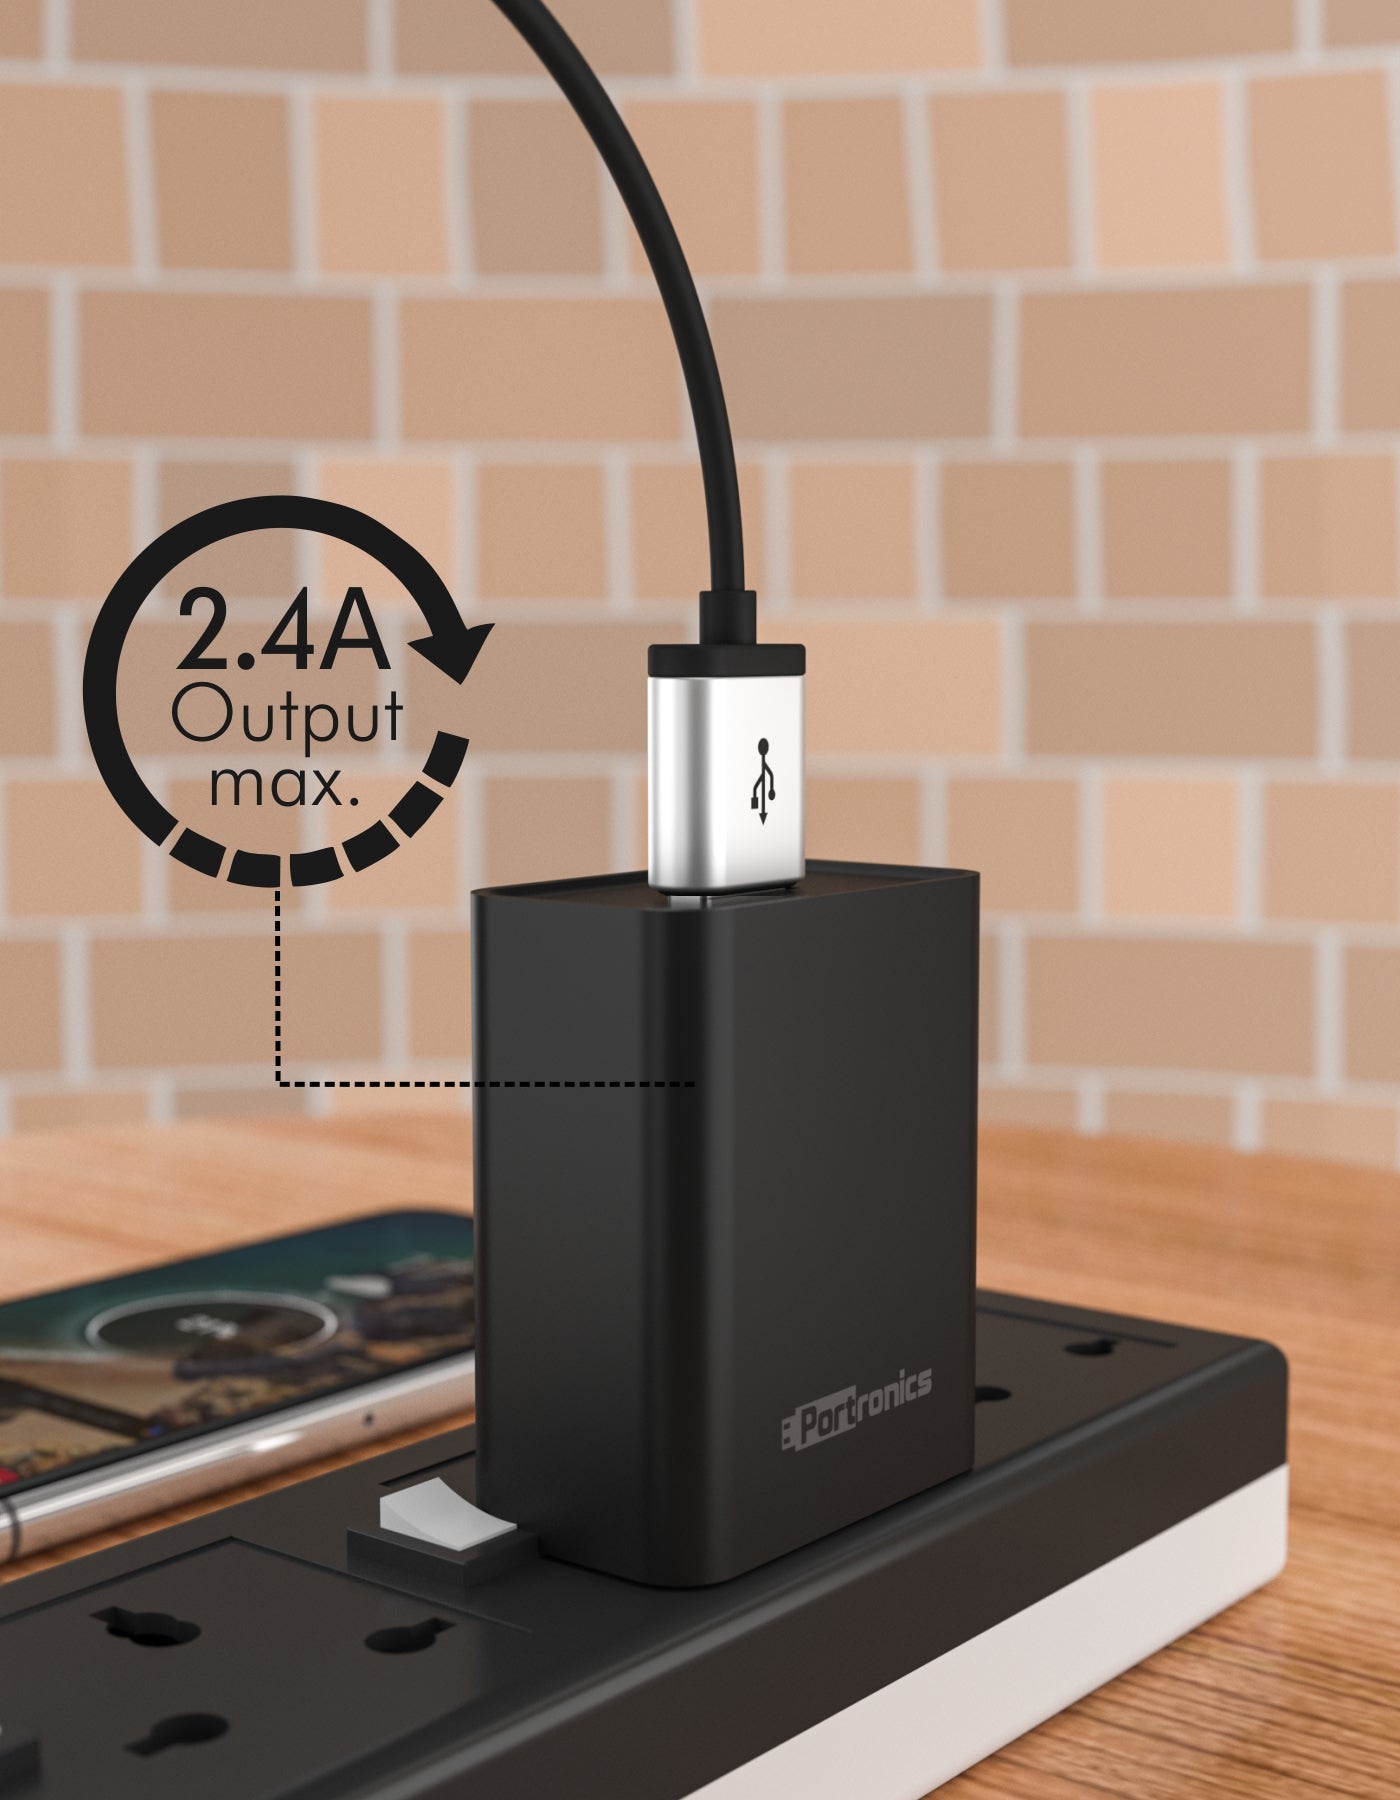 Portronics Adapto 62 USB Fast Charger 2.4A output max